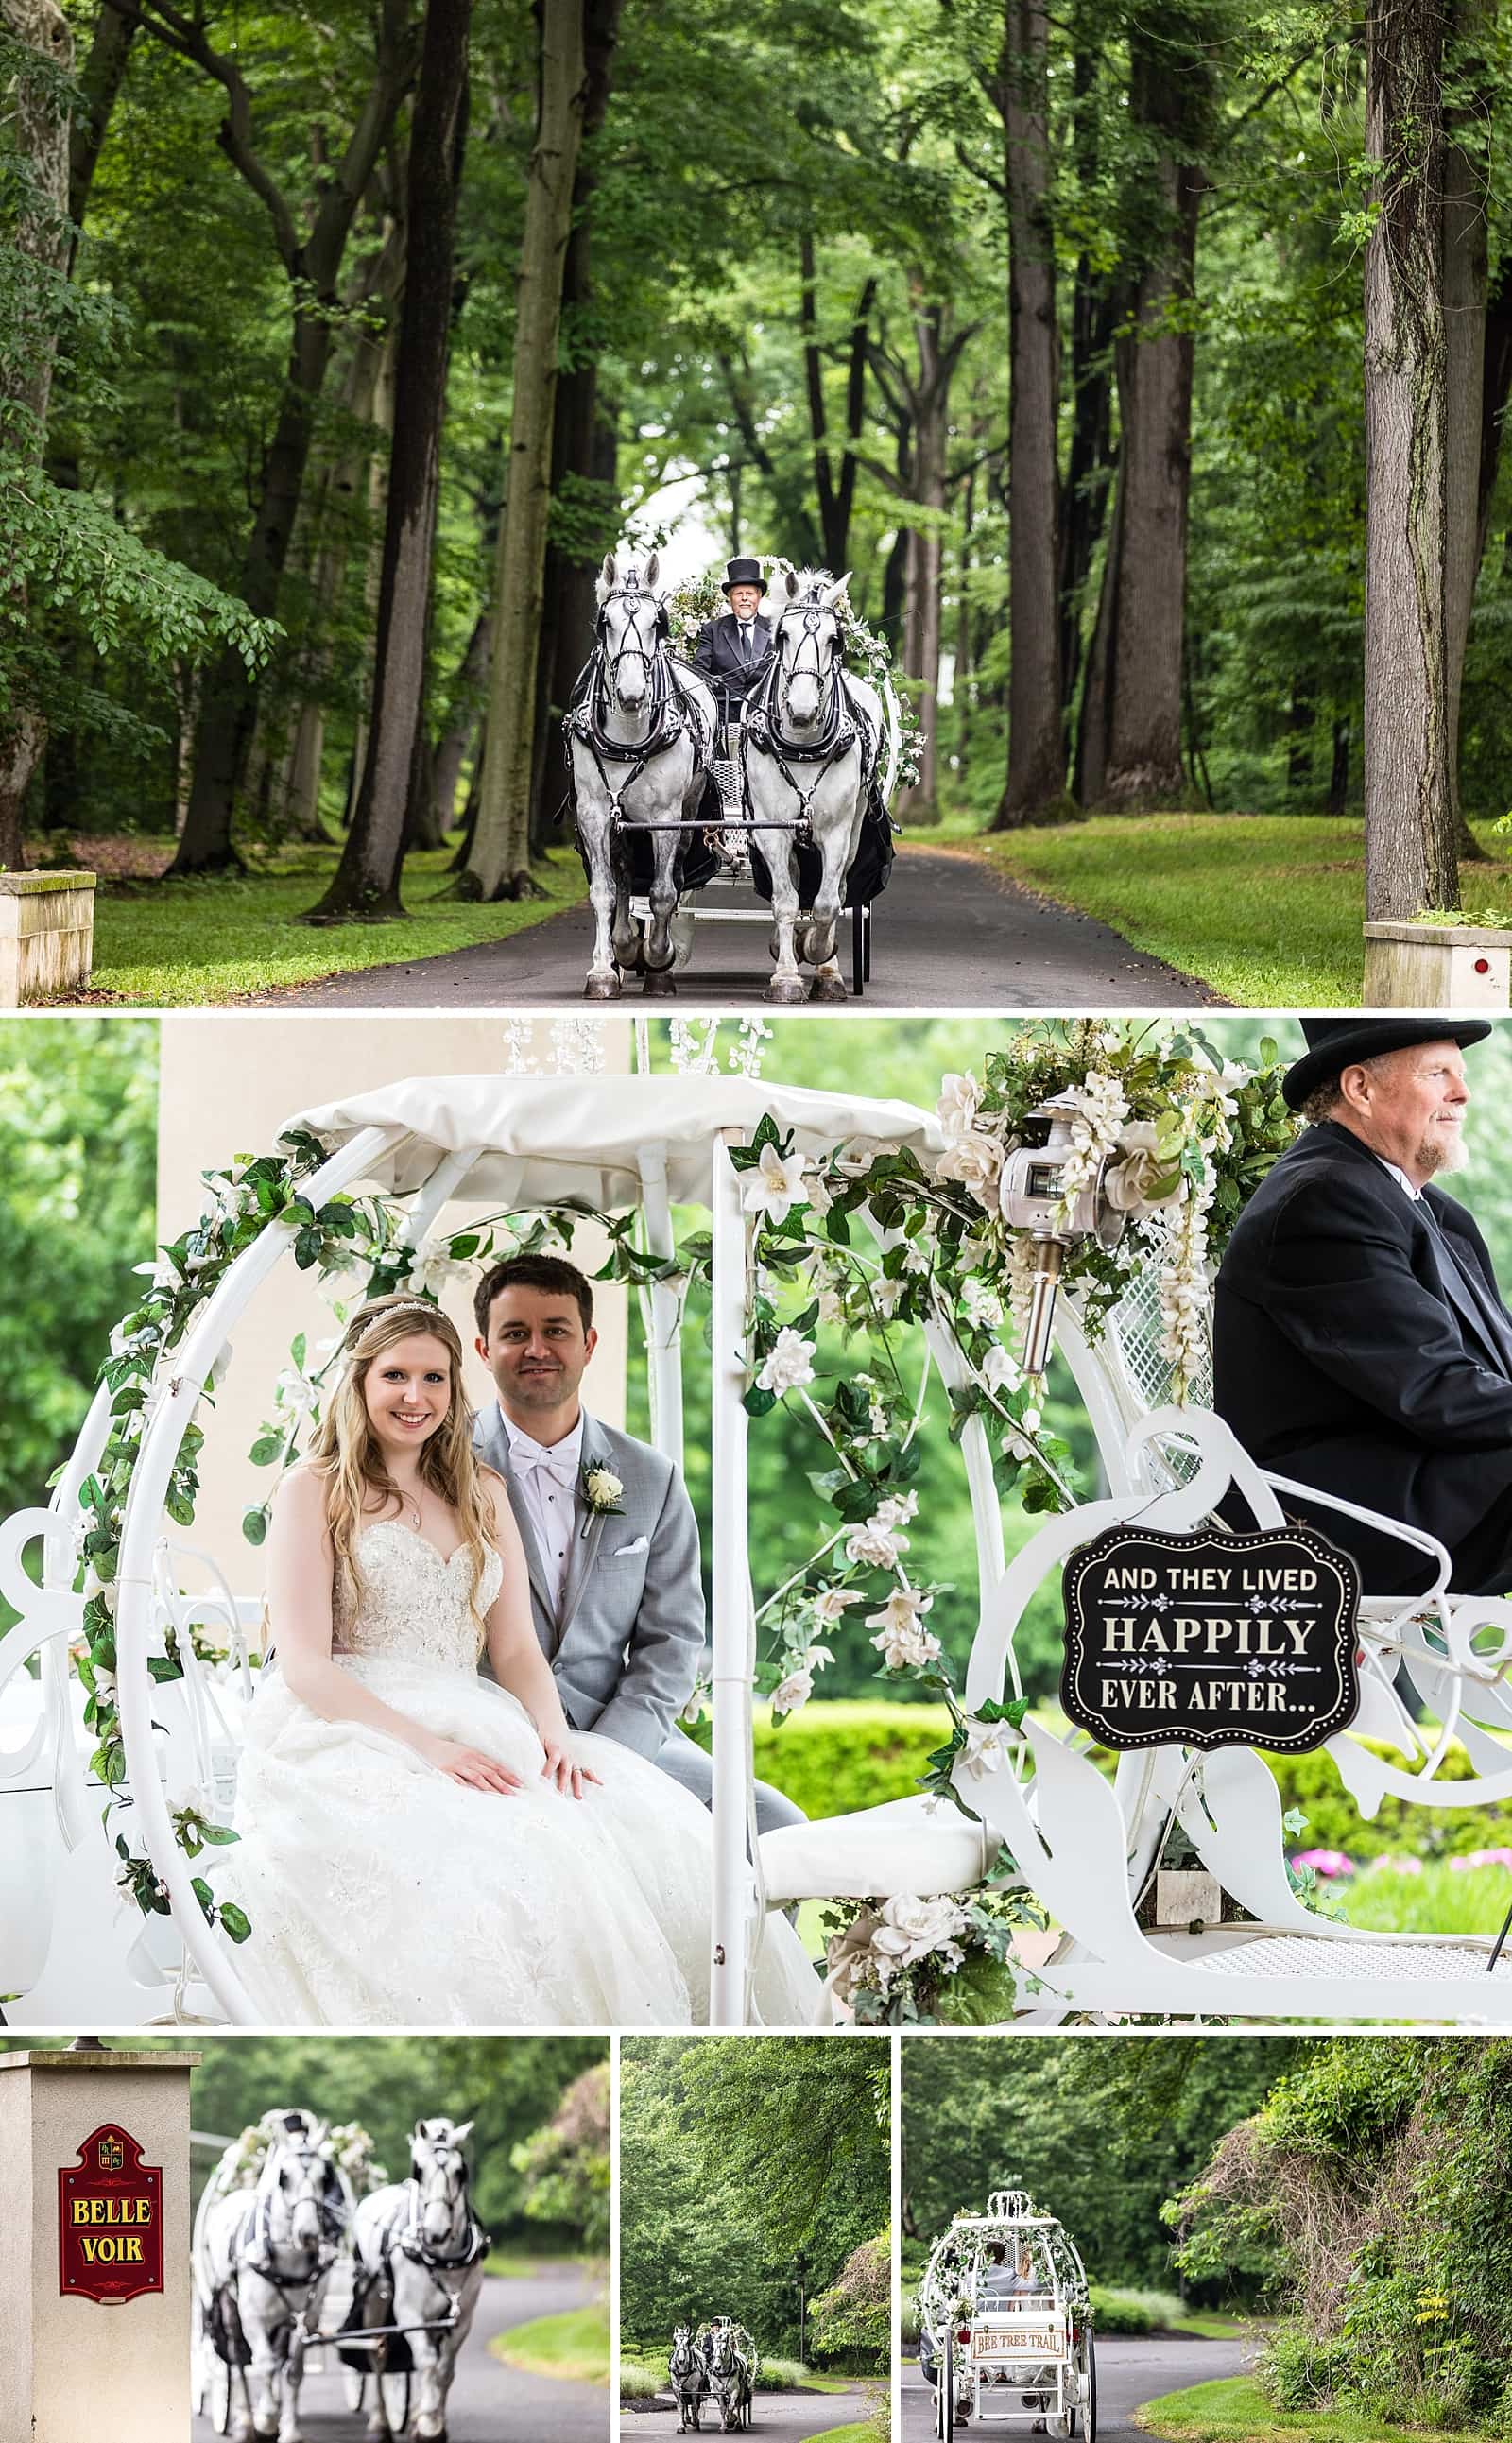 Horse drawn carriage, fairytale wedding, happily ever after, wedding portraits, bride and groom portraits